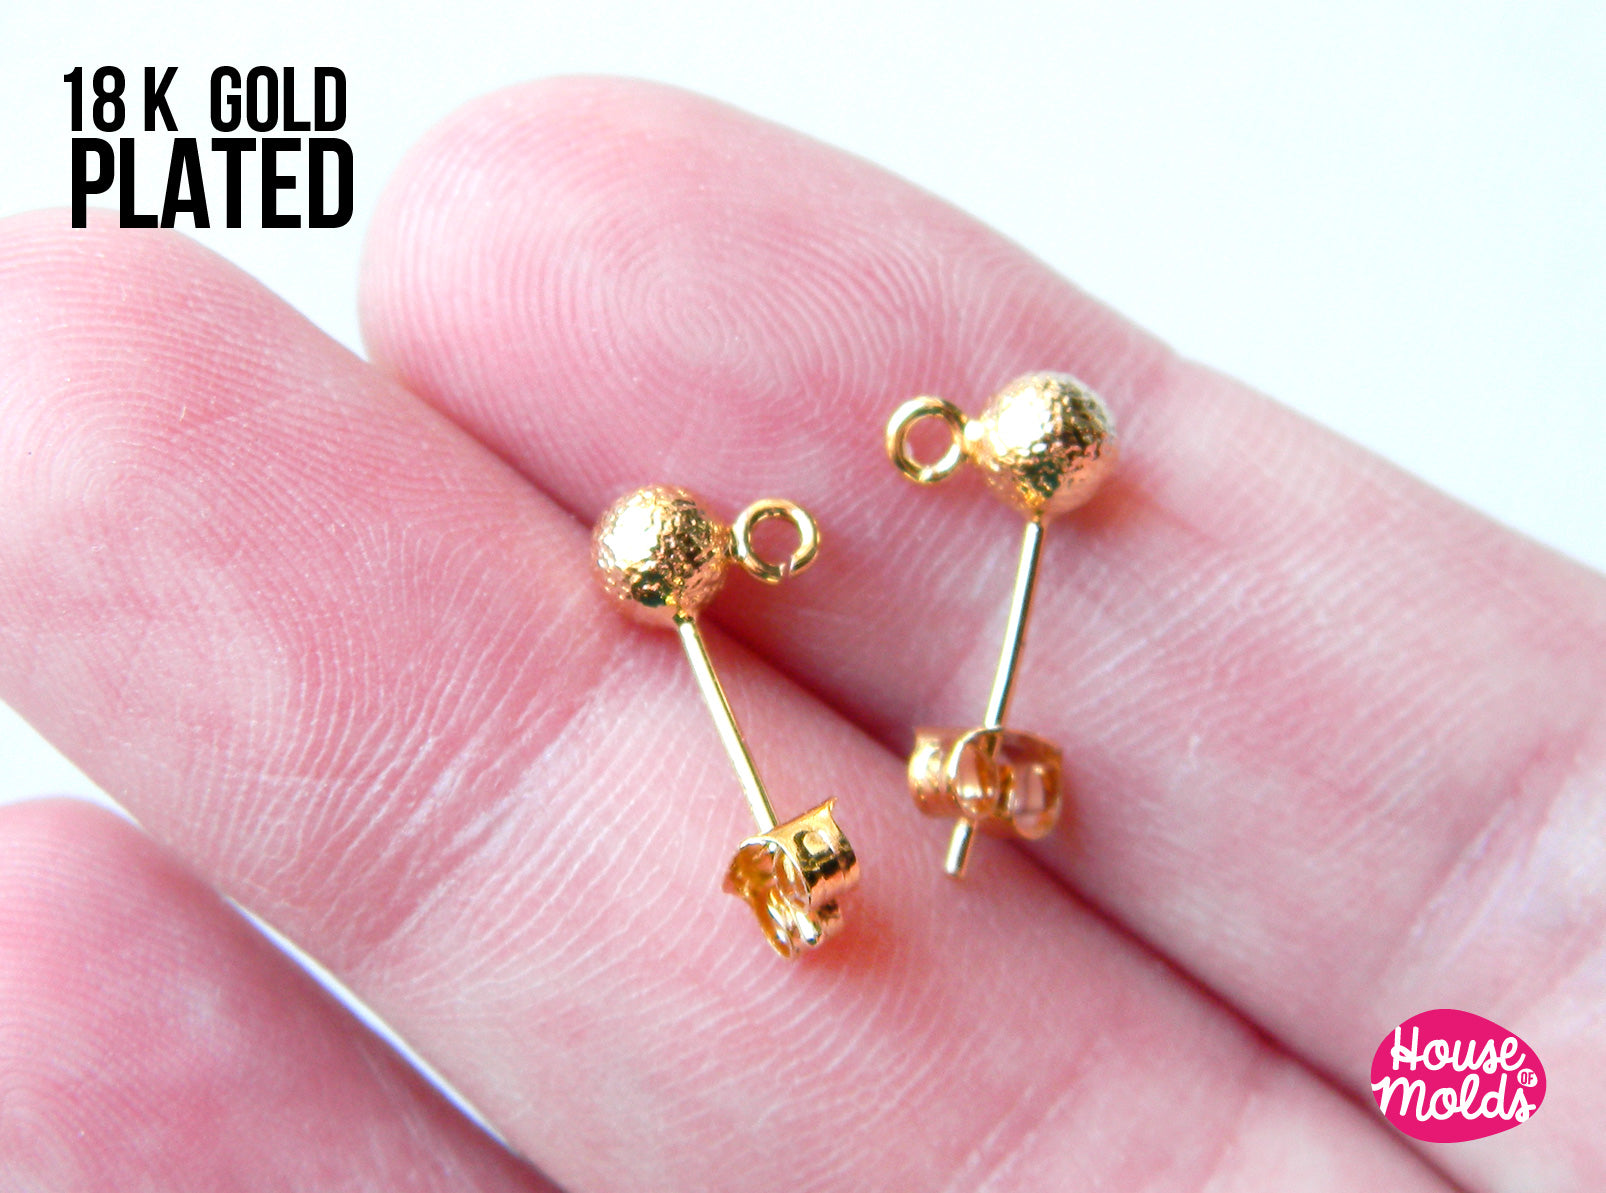 18K Gold Plated Textured Ball Earrings with Hooks - backs included